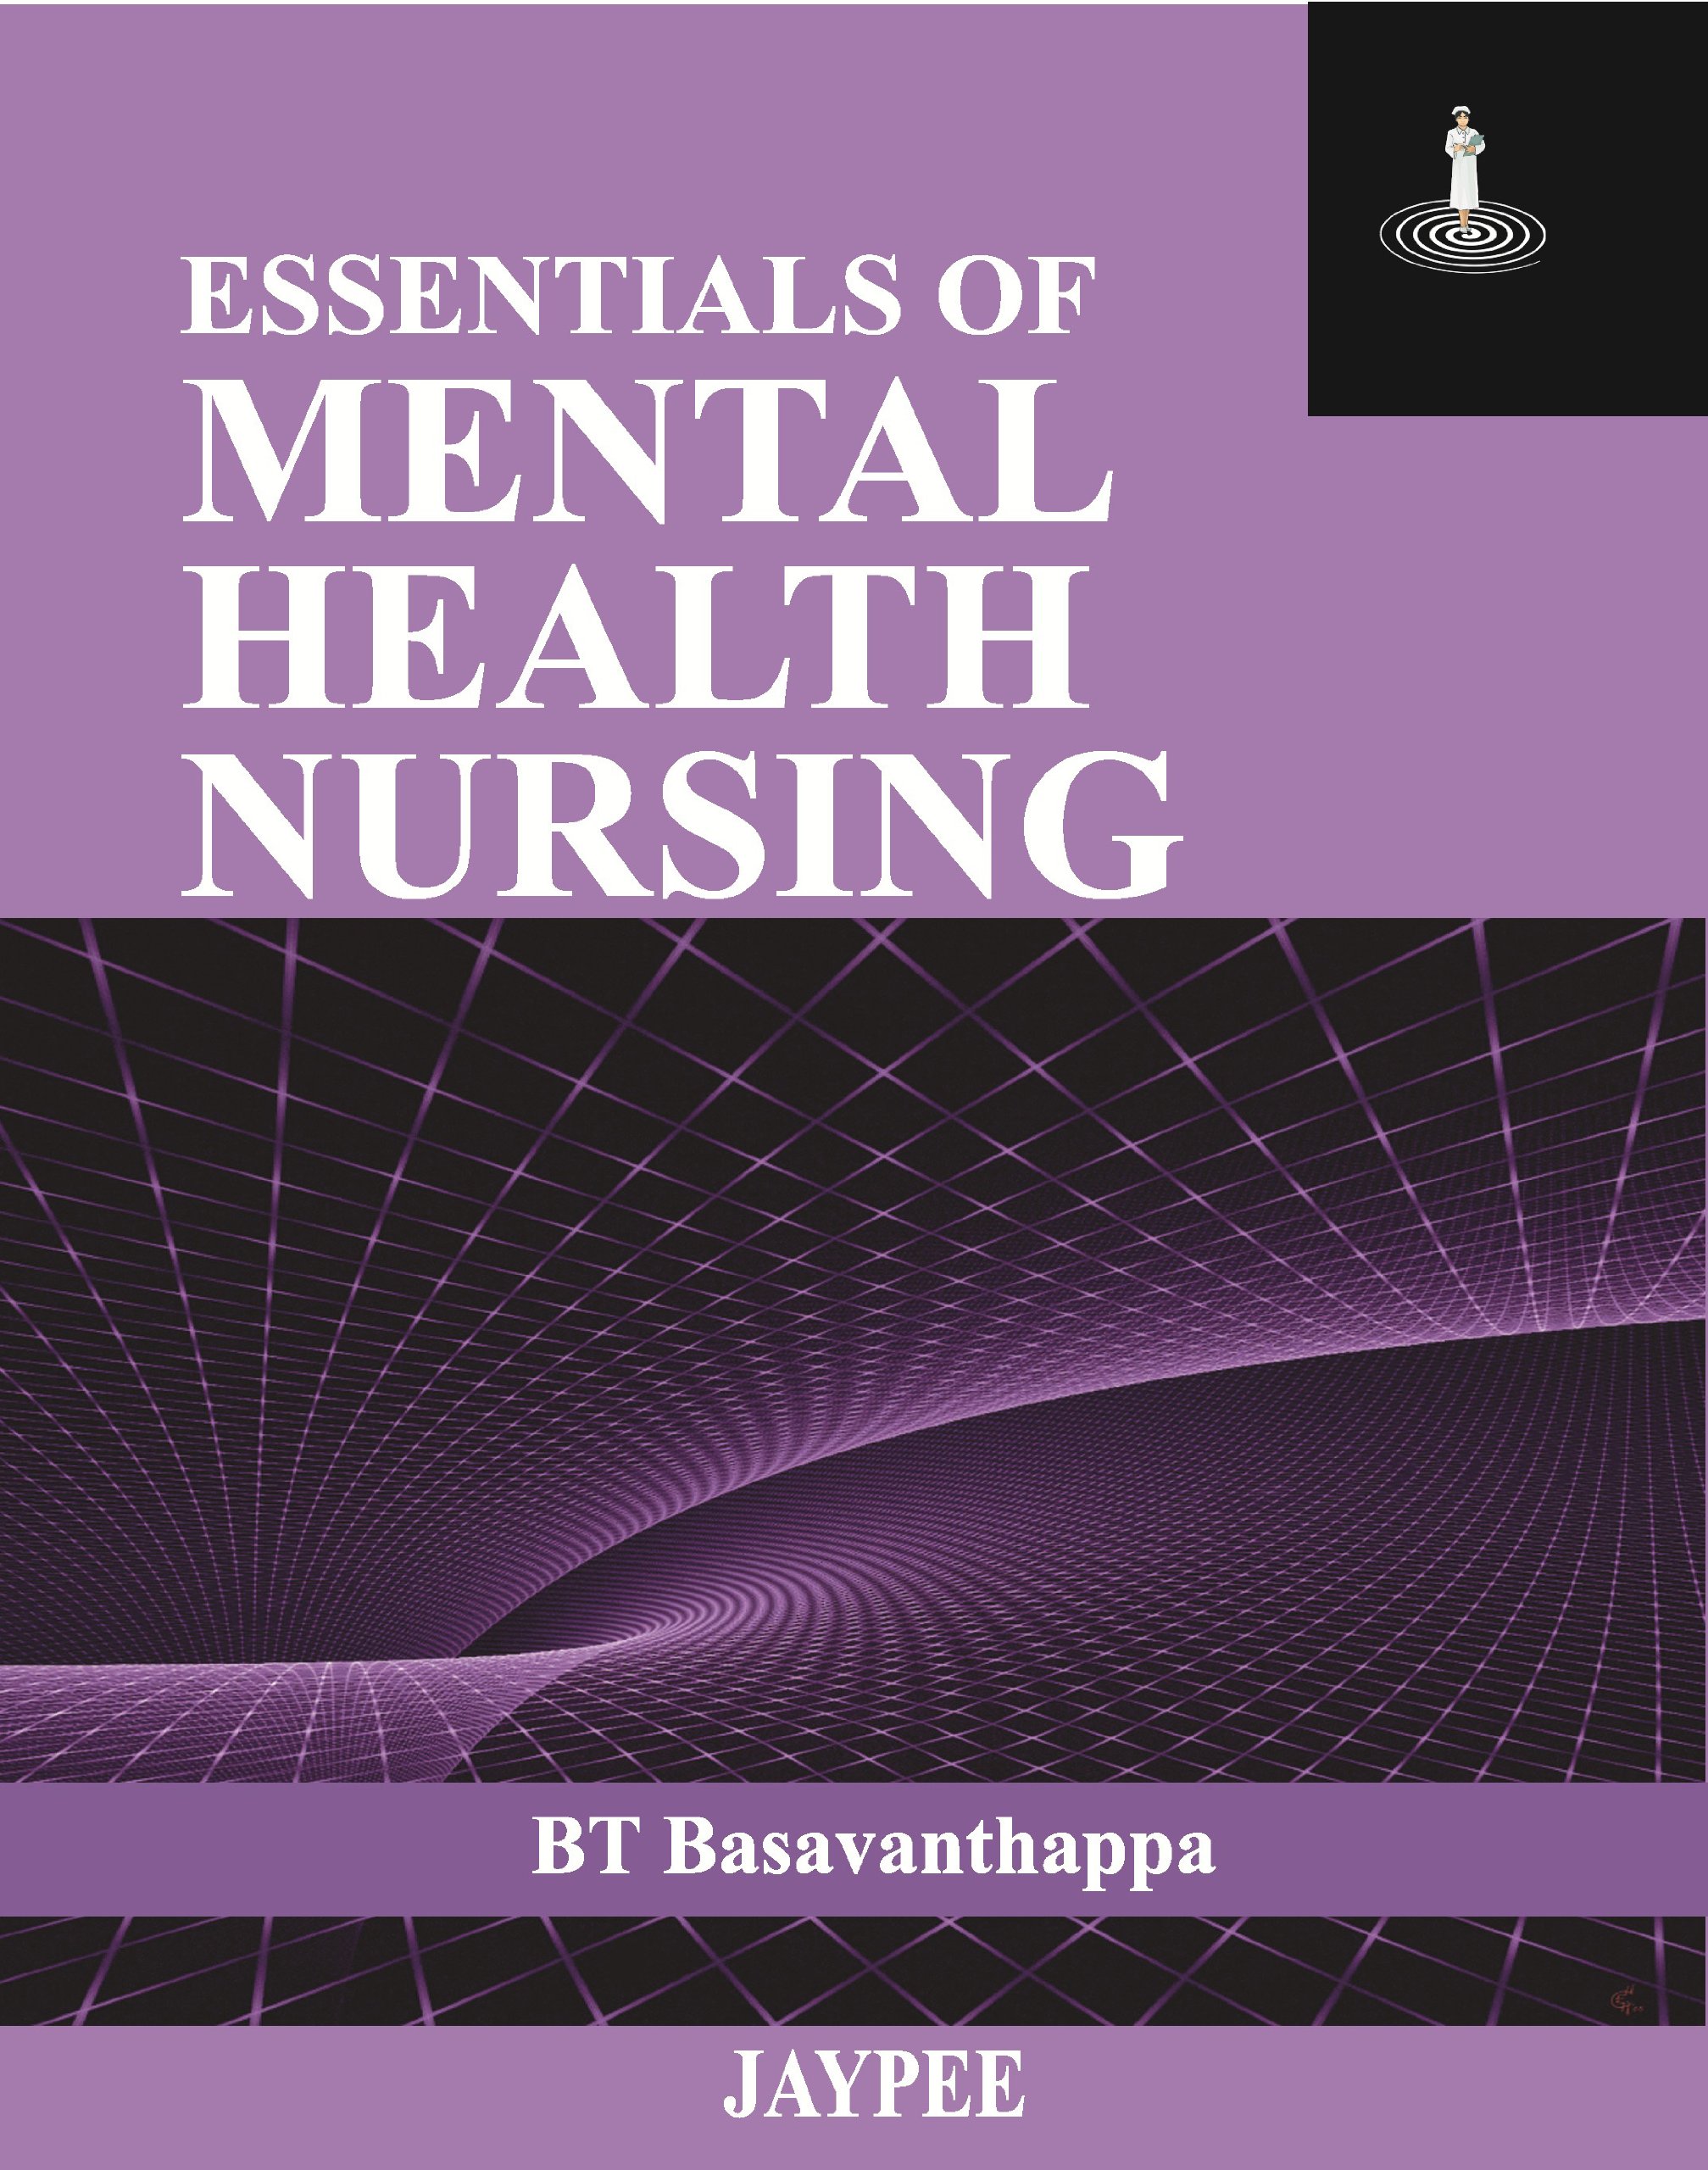 nursing research topics about mental health